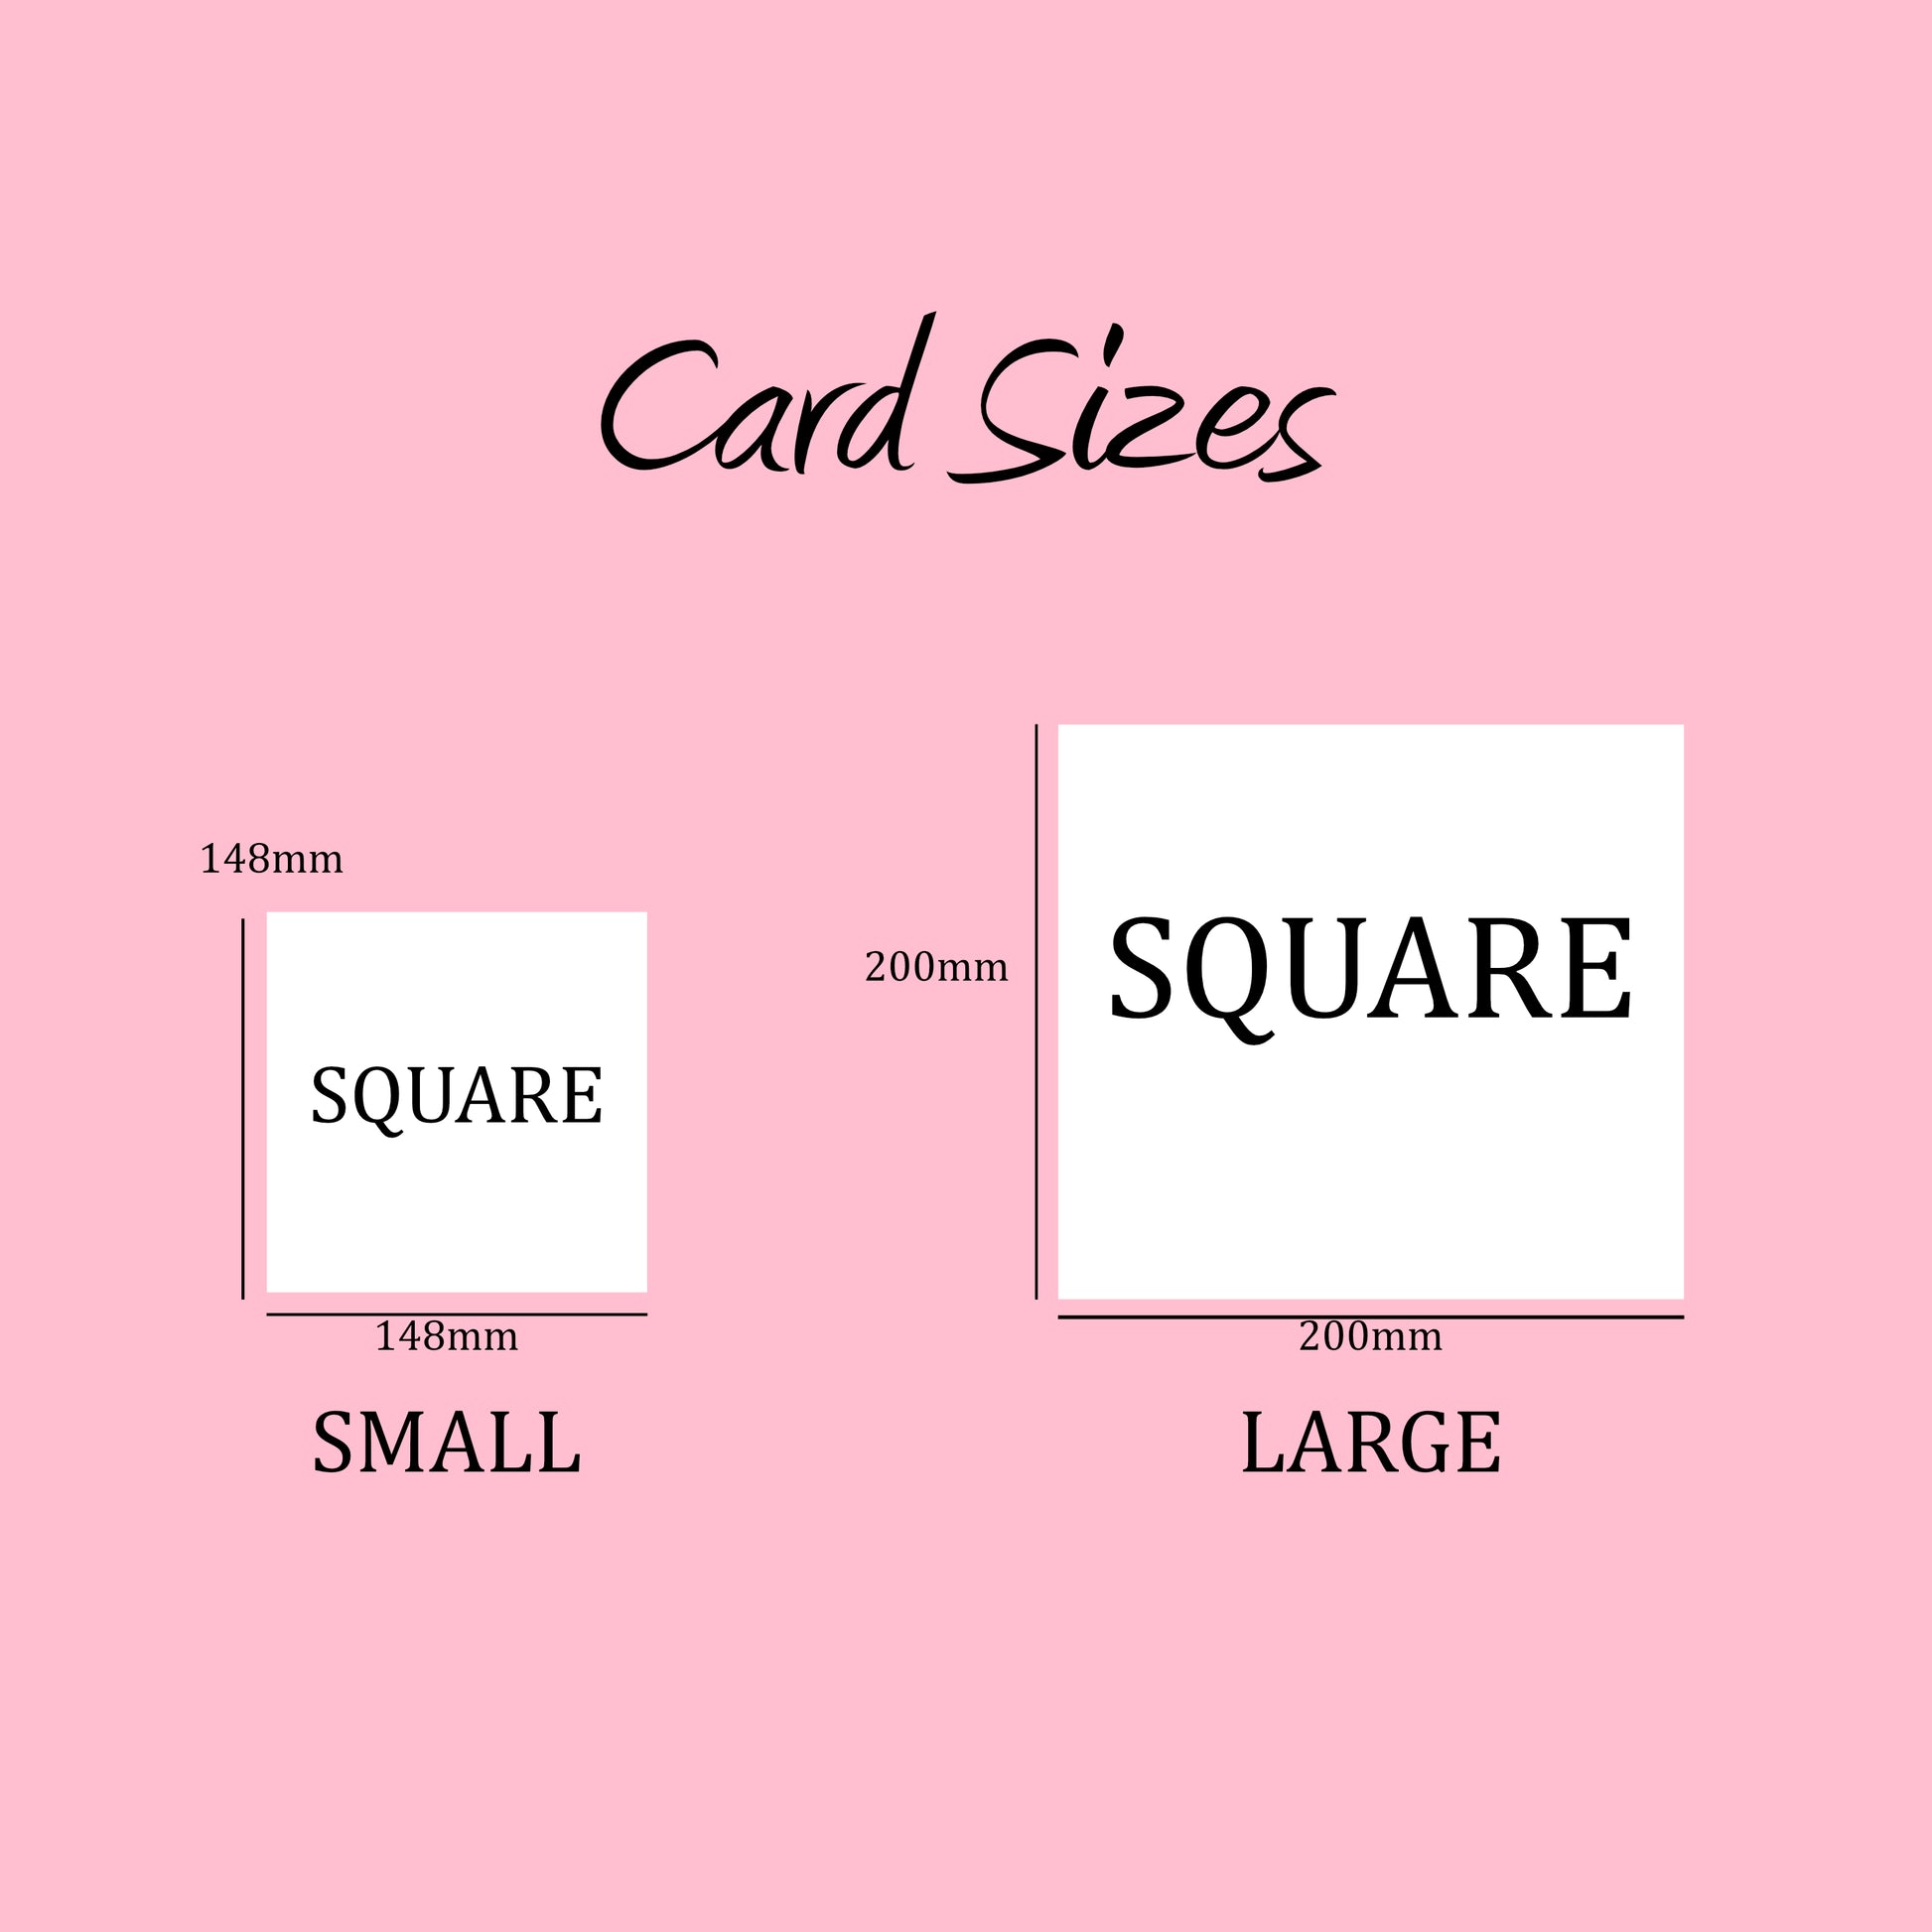 the size of a square and a smaller square on a pink background